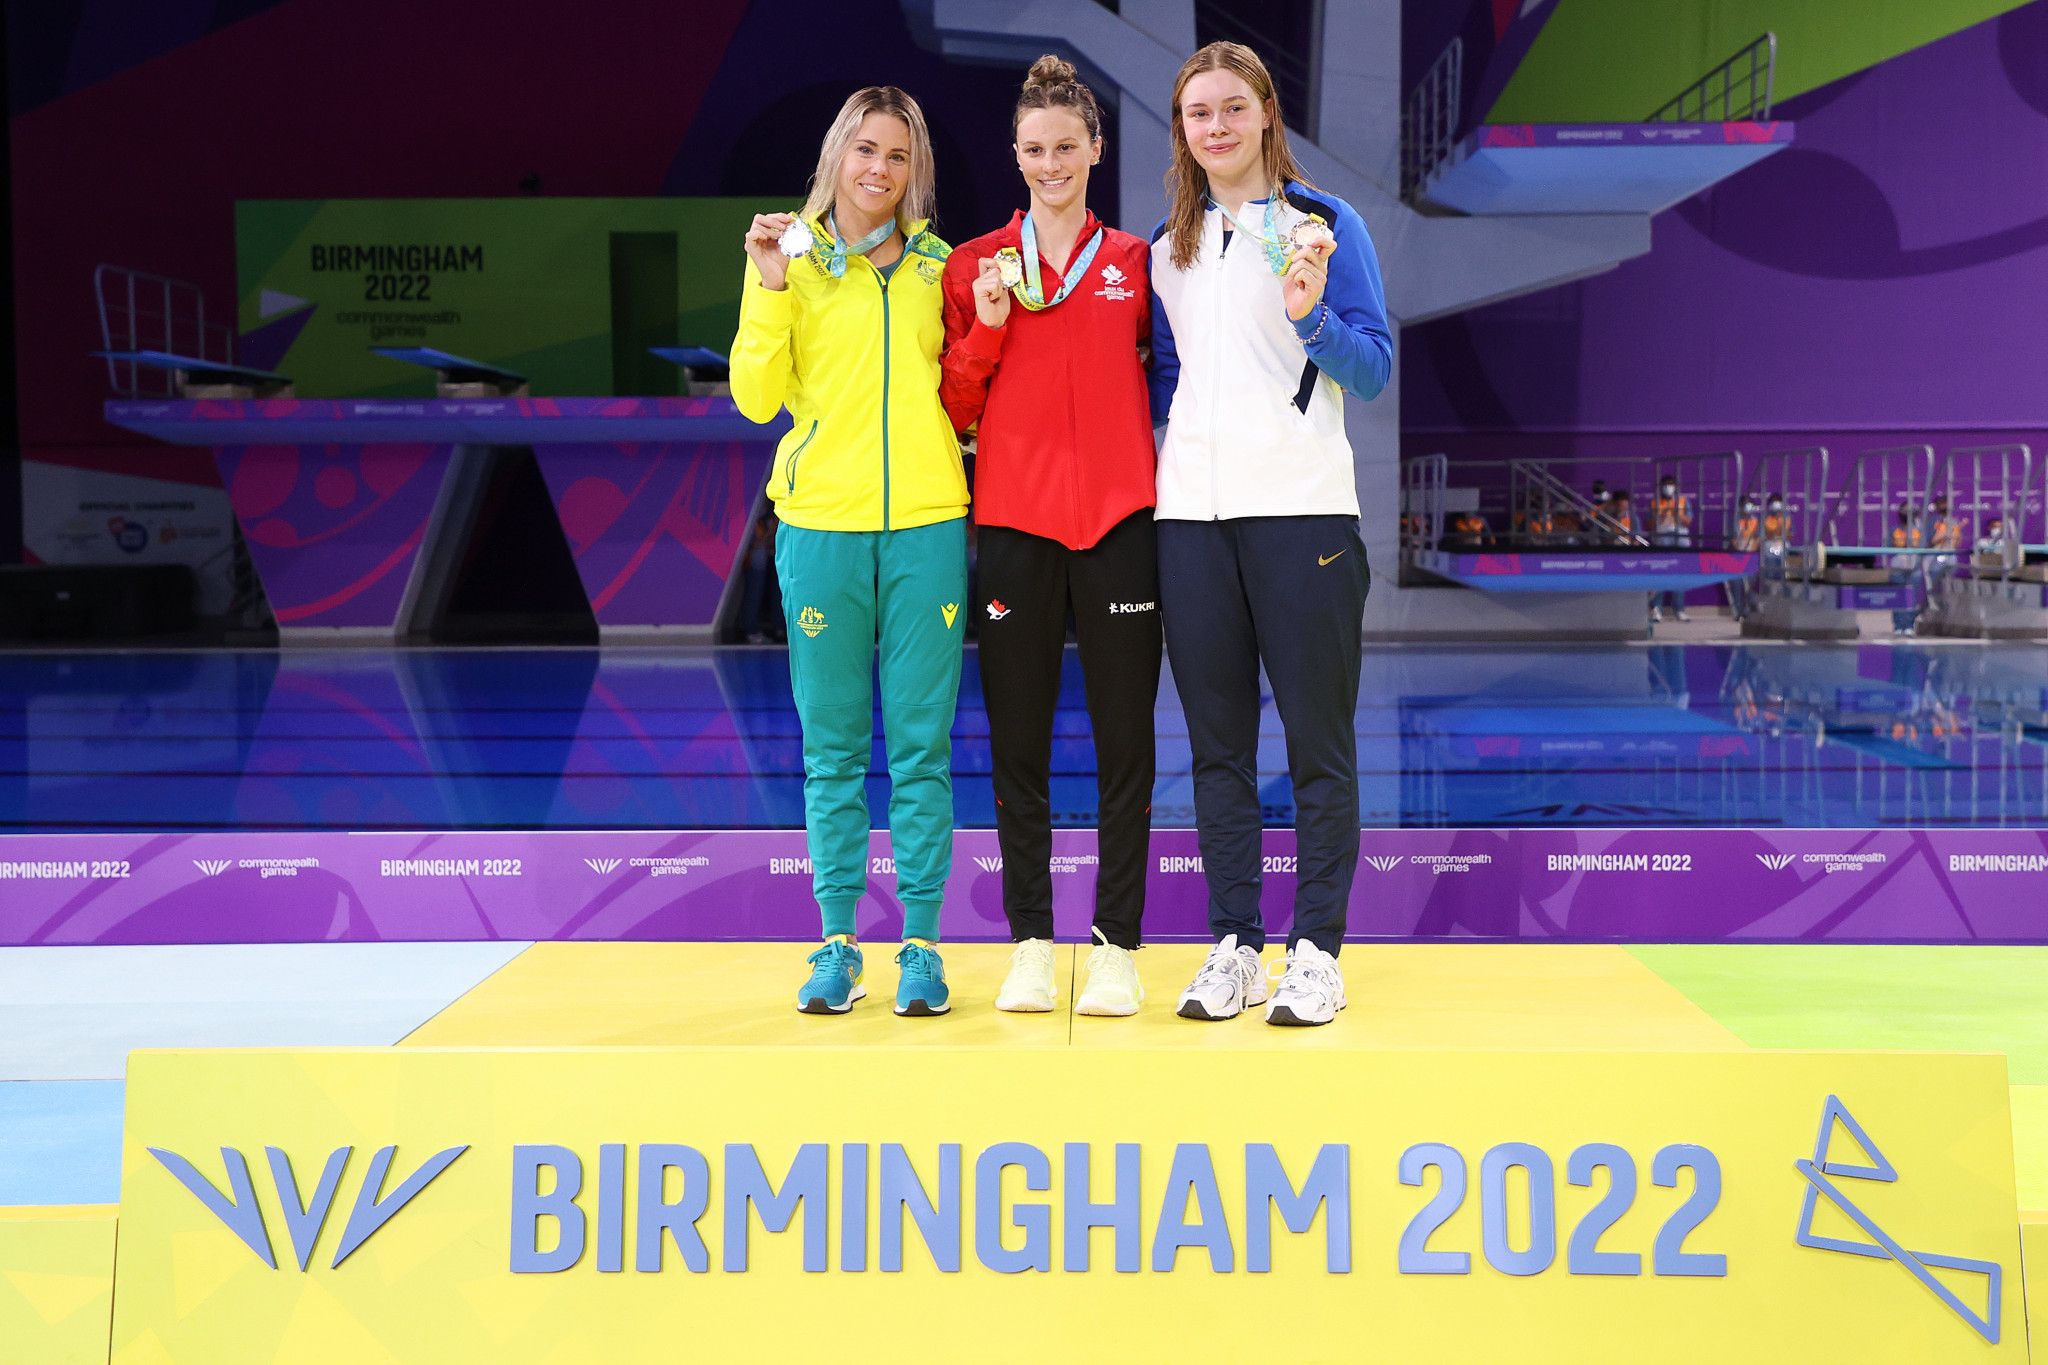 insidethegames is reporting LIVE from the Birmingham 2022 Commonwealth Games